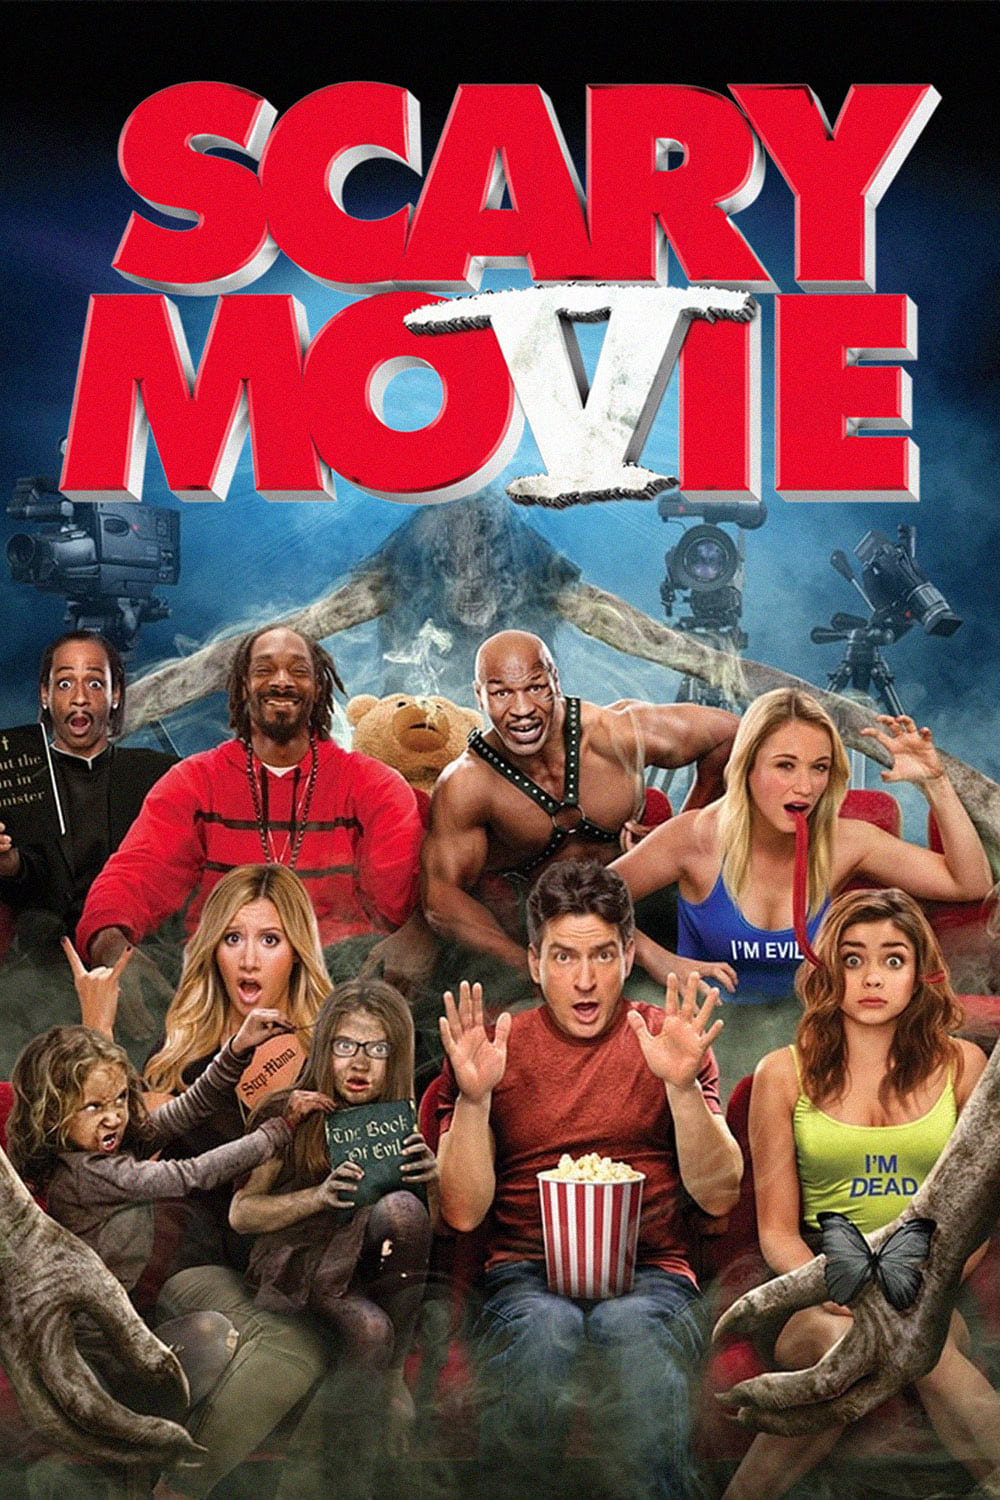 Affiche du film Scary Movie 5 poster